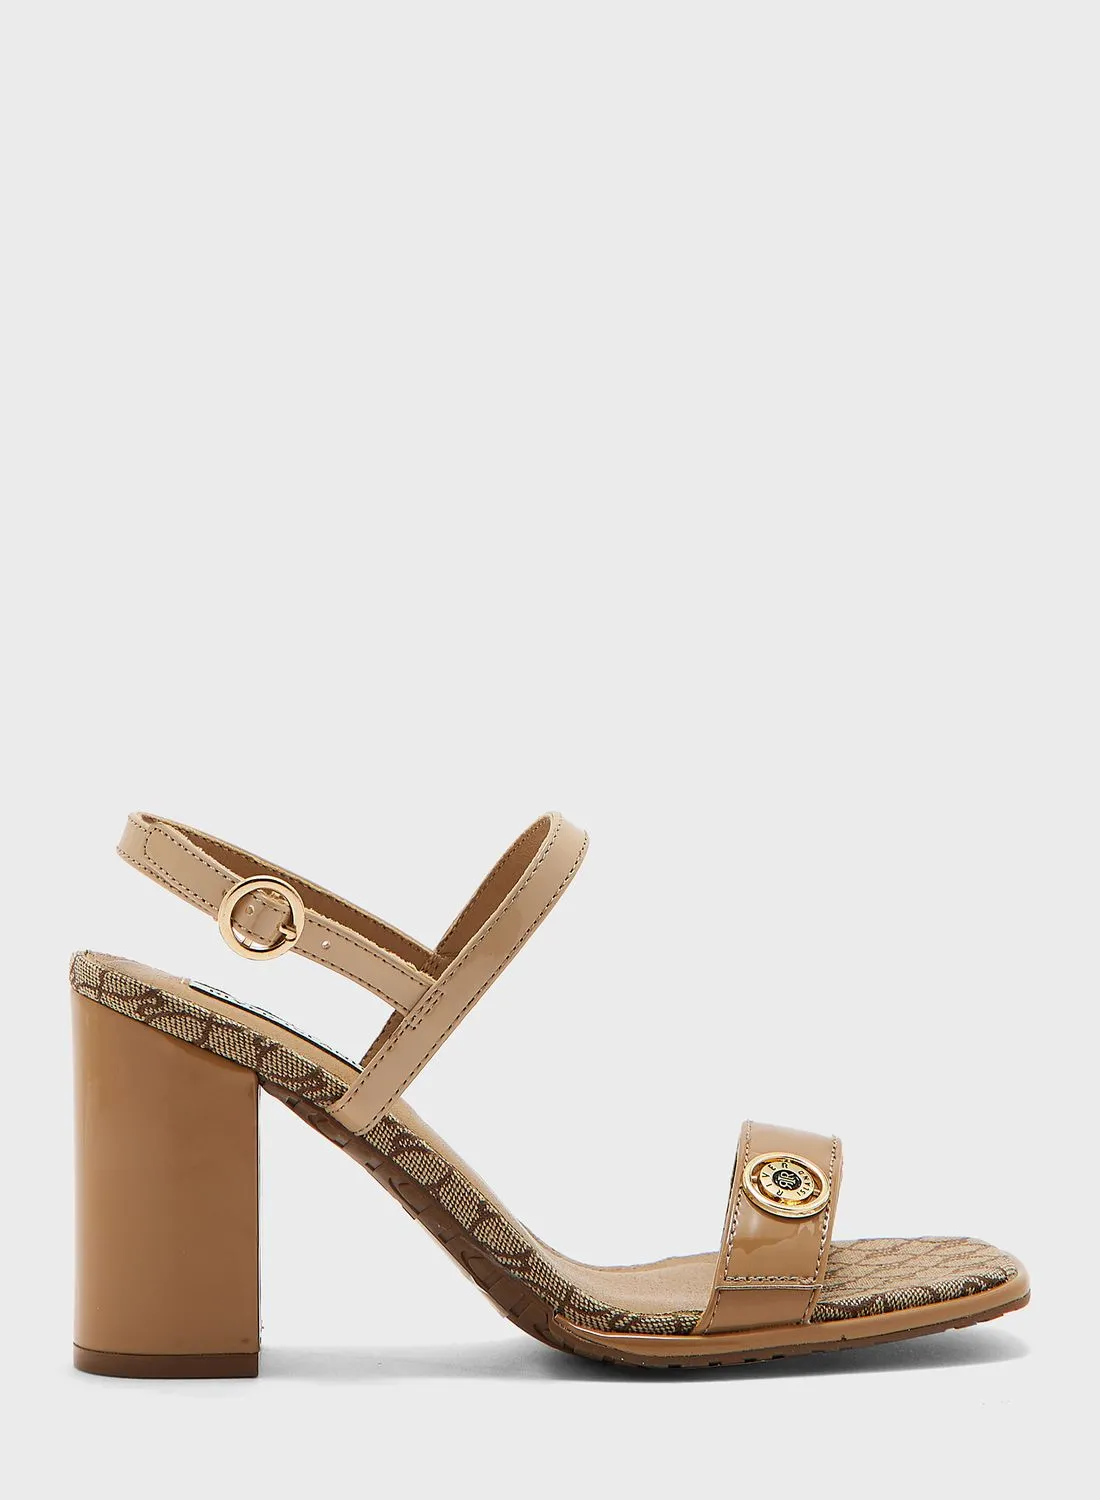 RIVER ISLAND Wide Double Buckle Flat Sandals